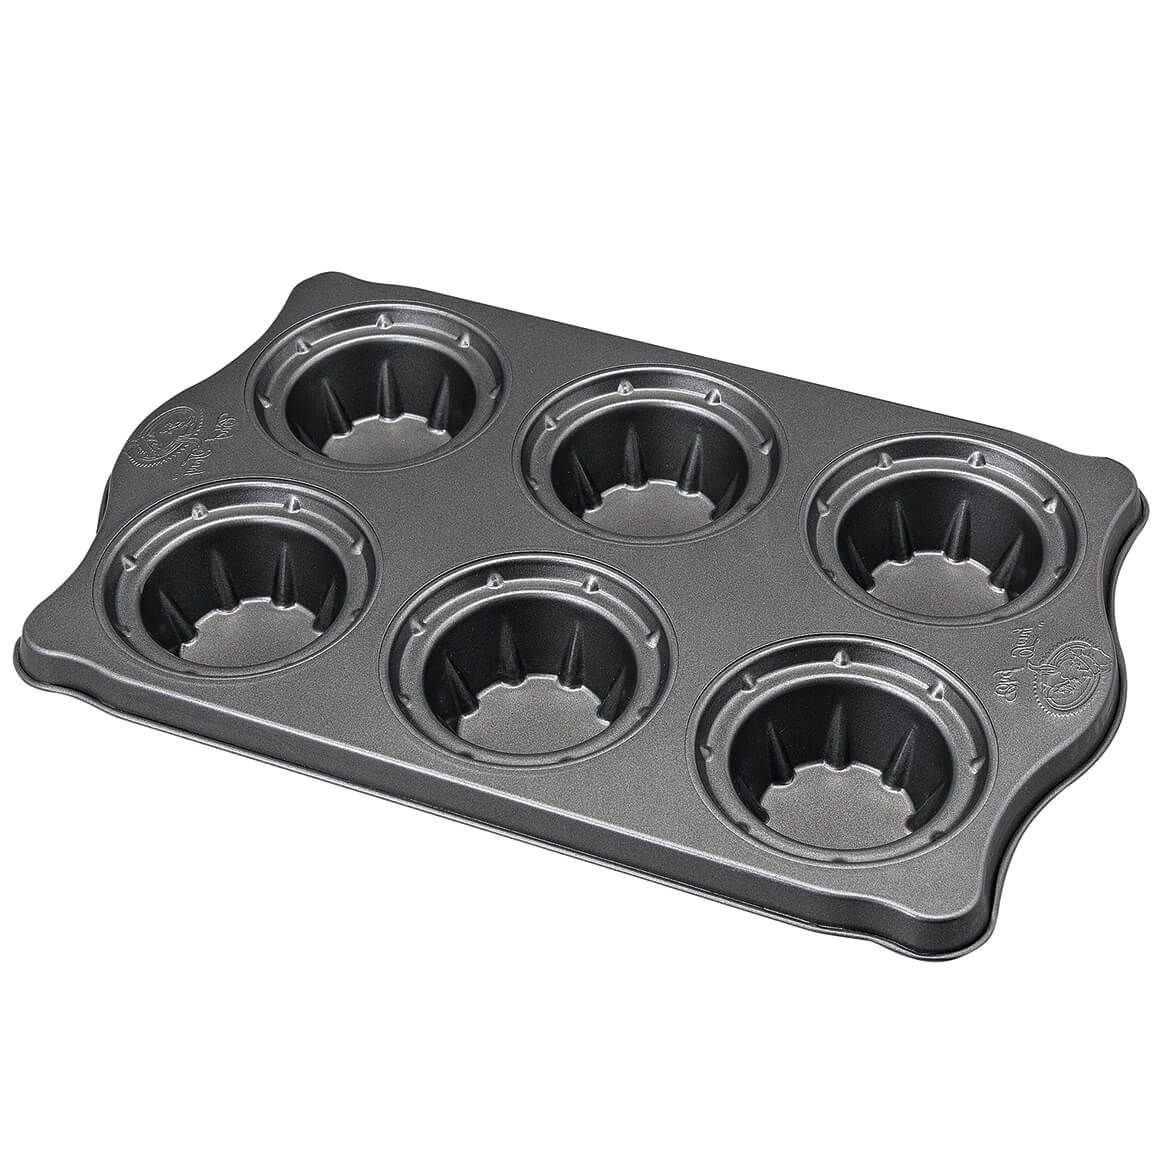 2 in 1 Bacon Cup Pan by Home Marketplace + '-' + 371606